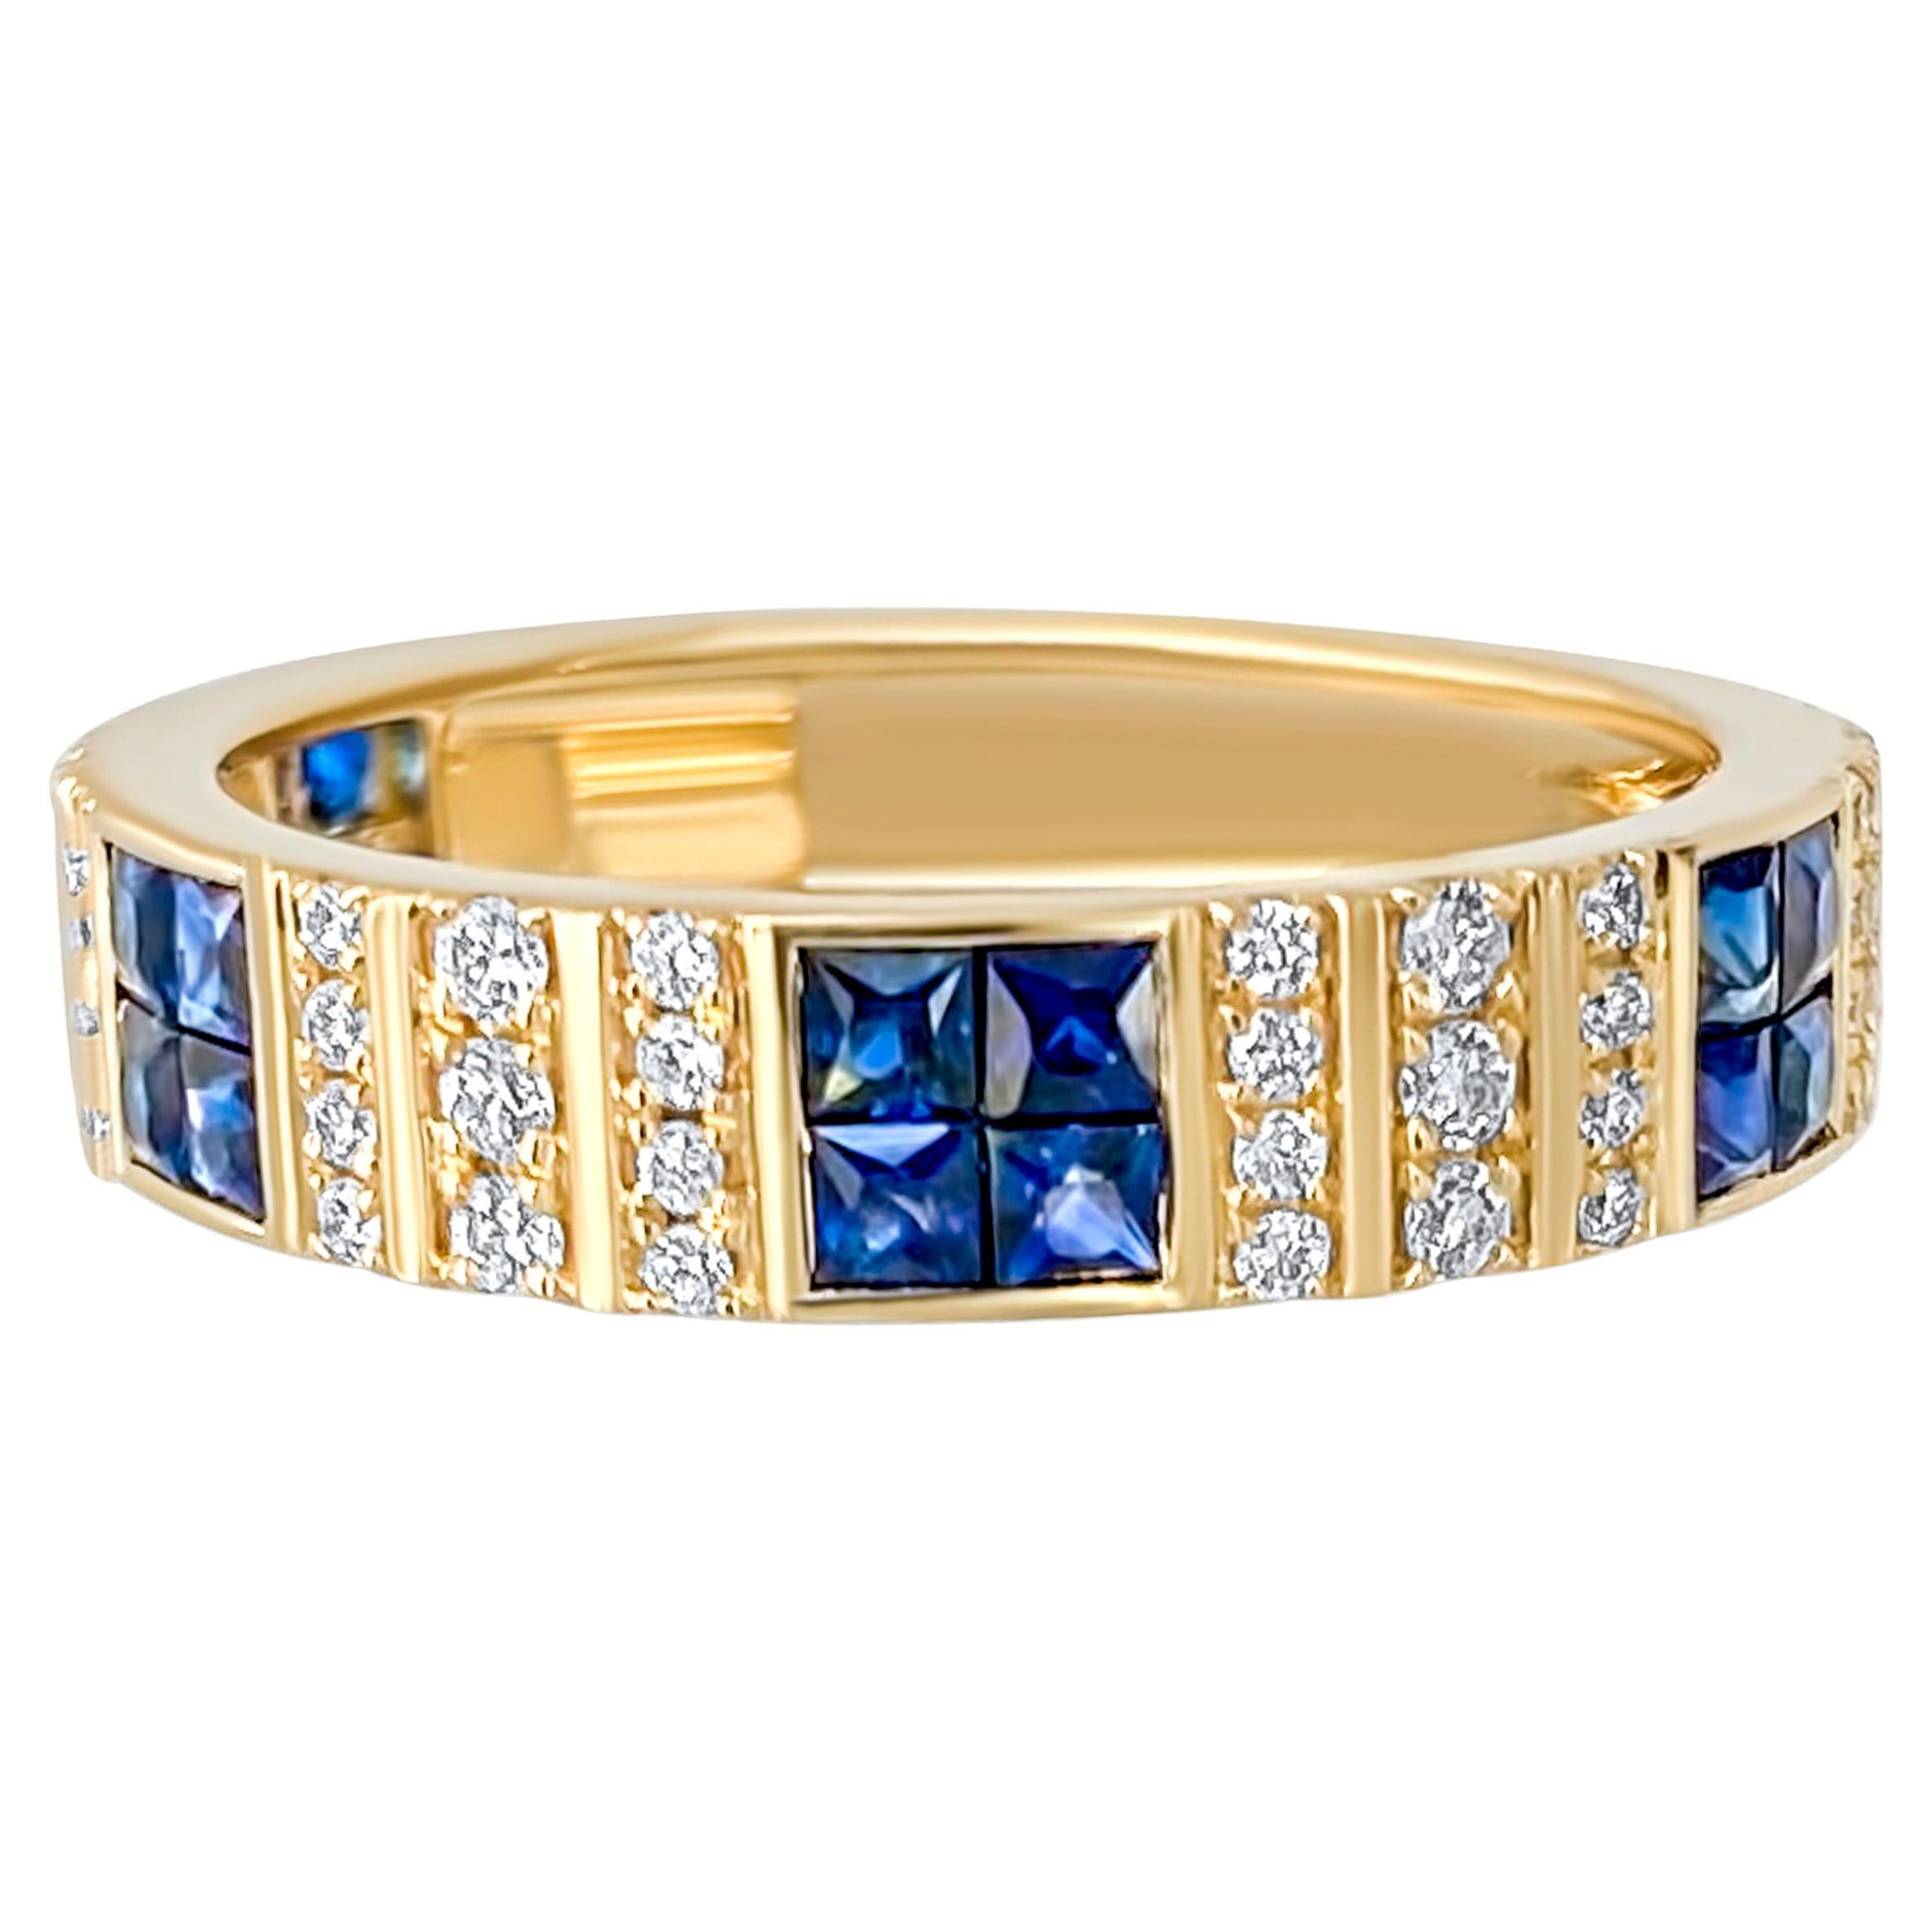 Pinstripe Strength Diamond Cigar Band Skinny Ring with Sapphire Inlay For Sale